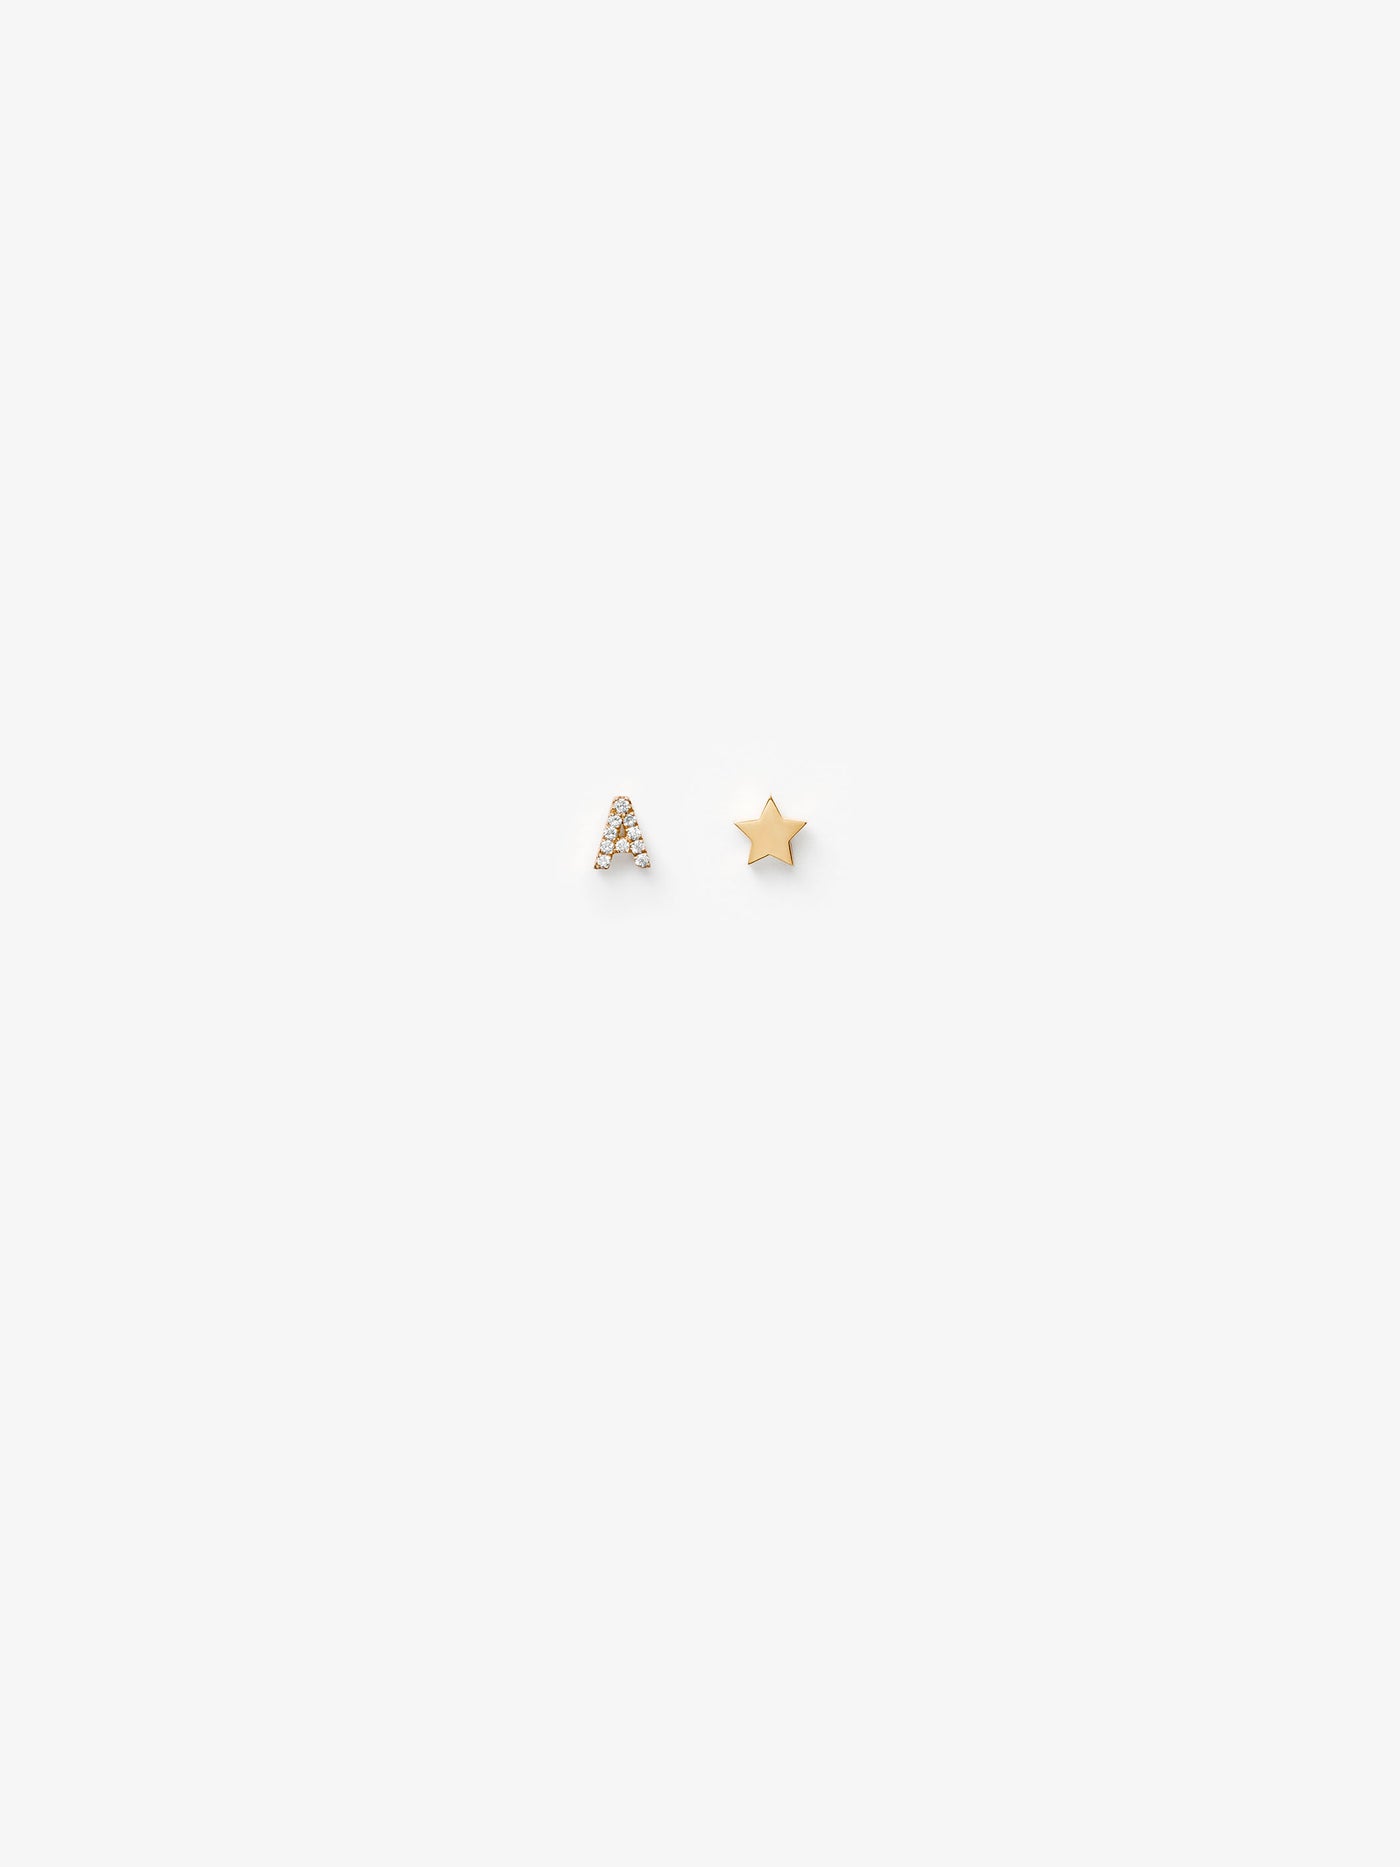 One Letter and Star Stud Earrings in Diamonds and 18k Gold